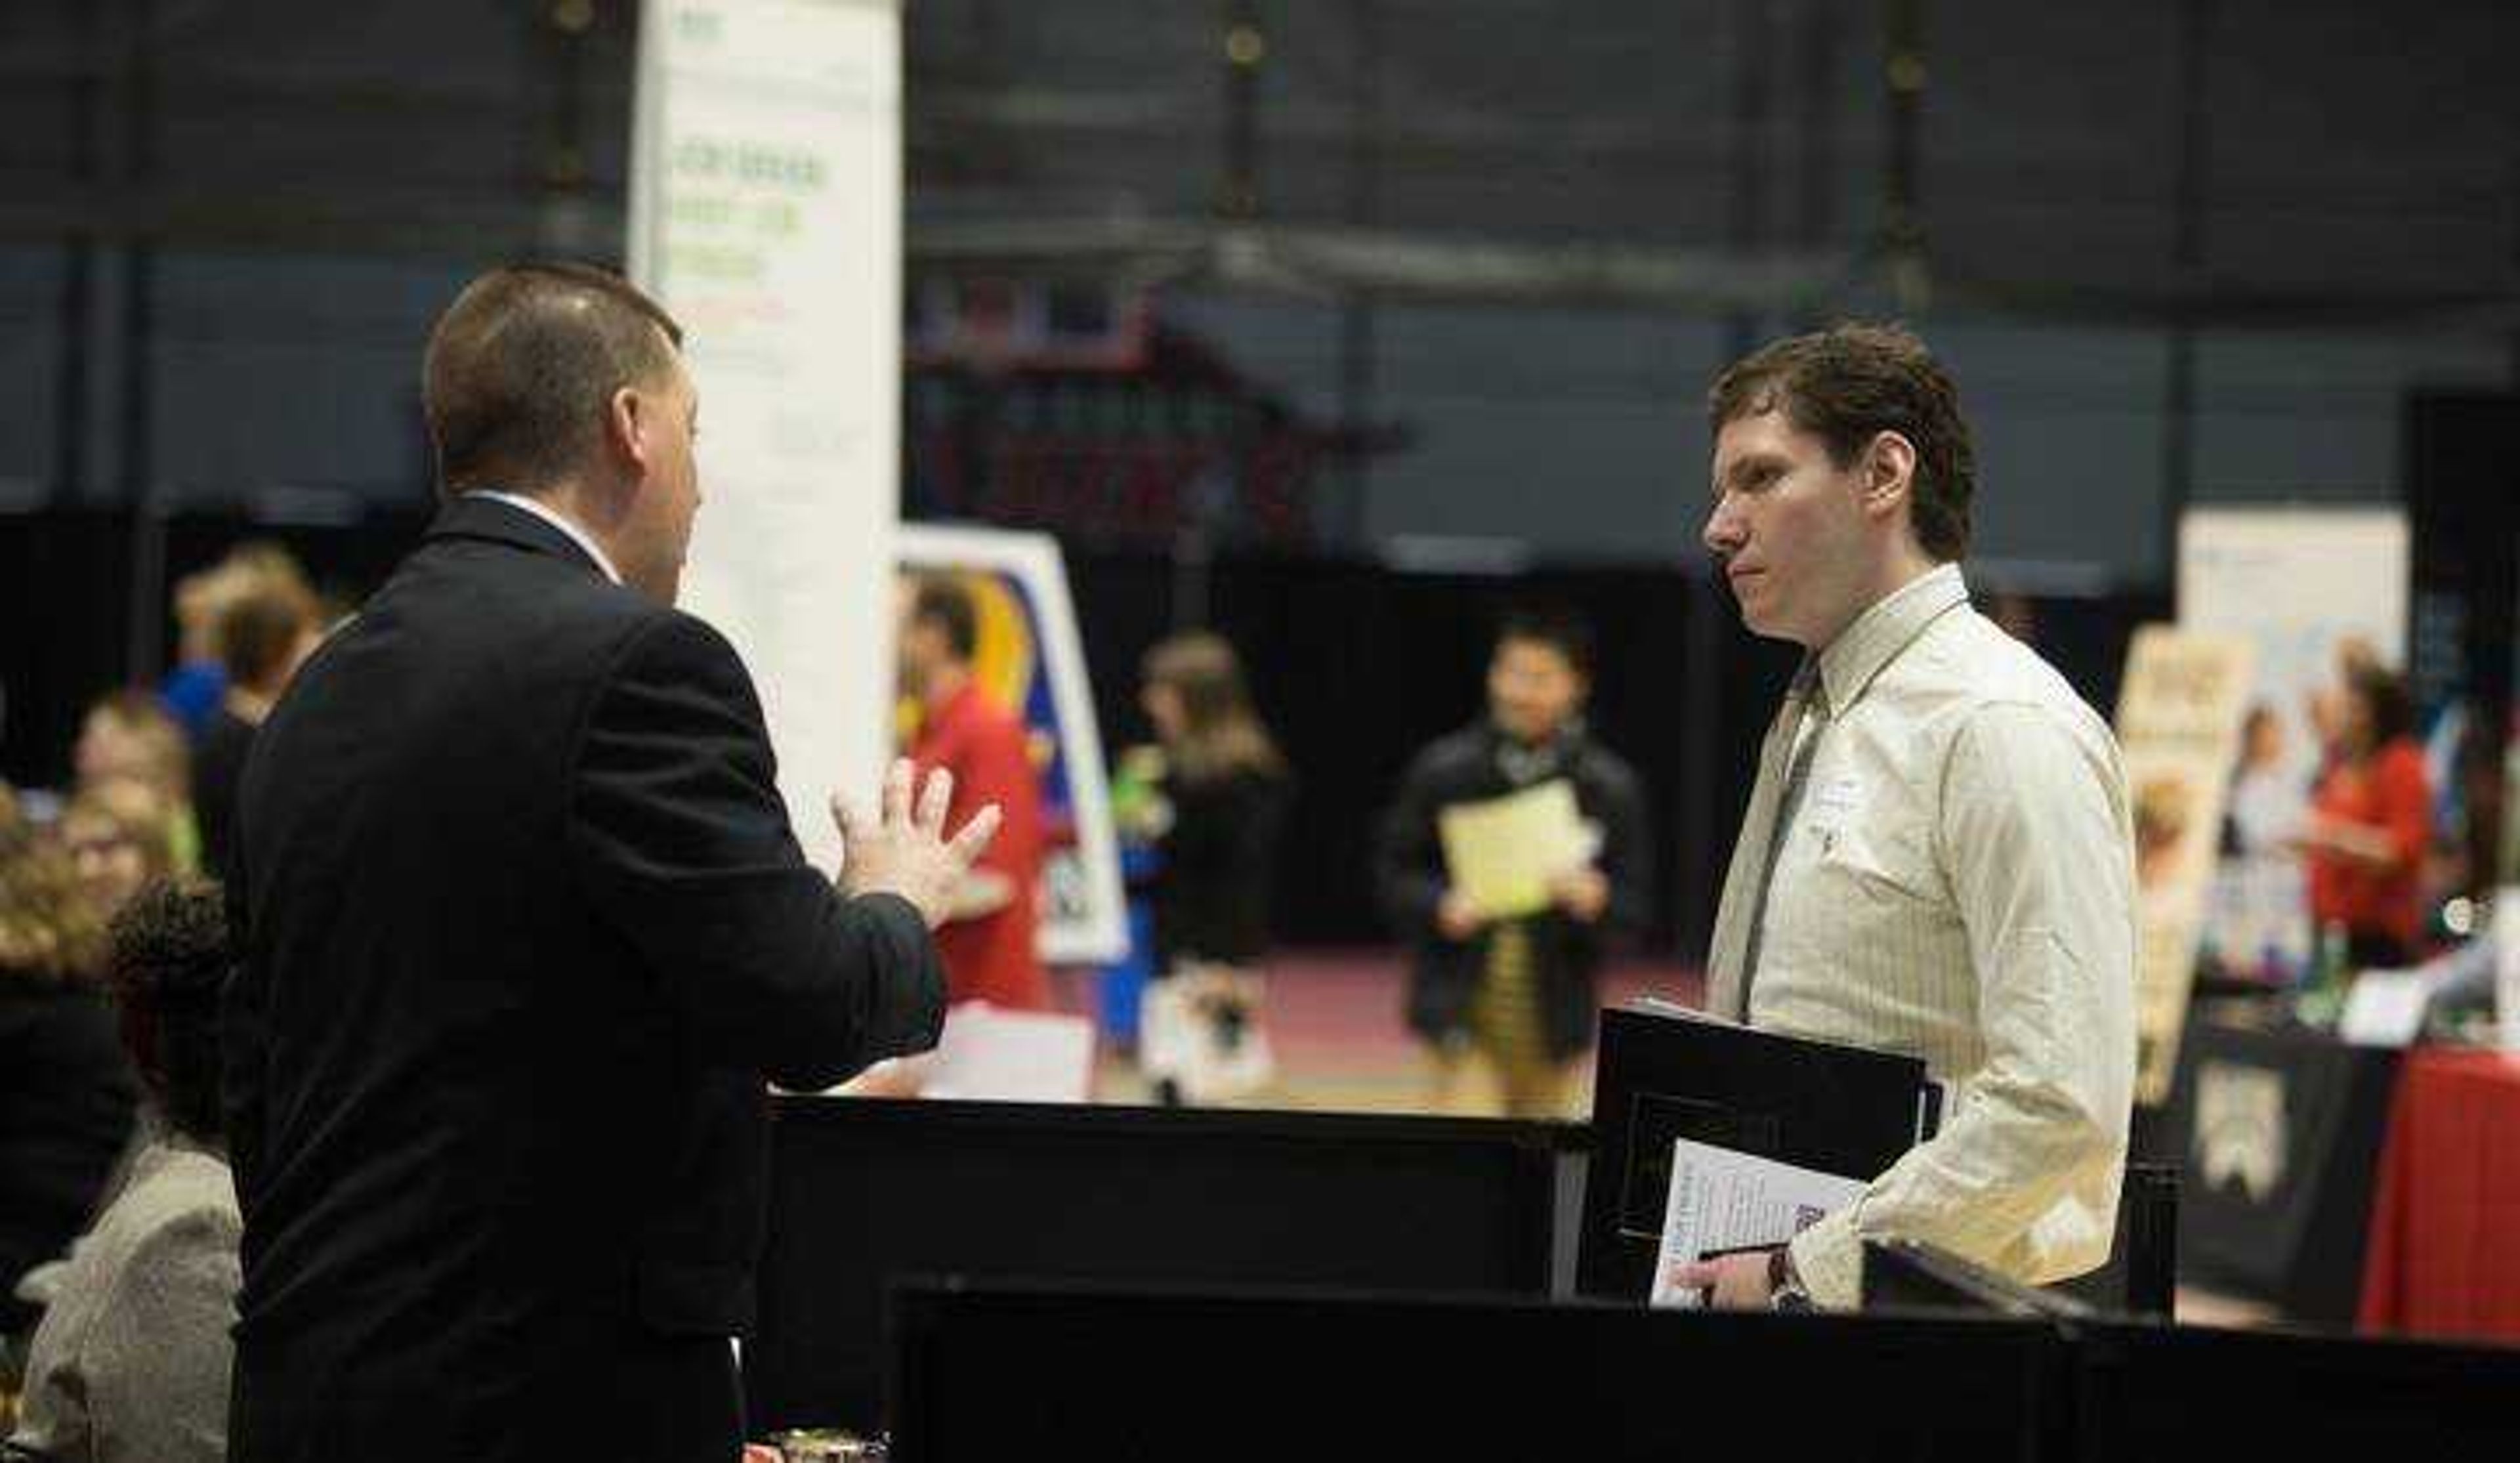 The Career and Internship fair will be held on Oct. 8.